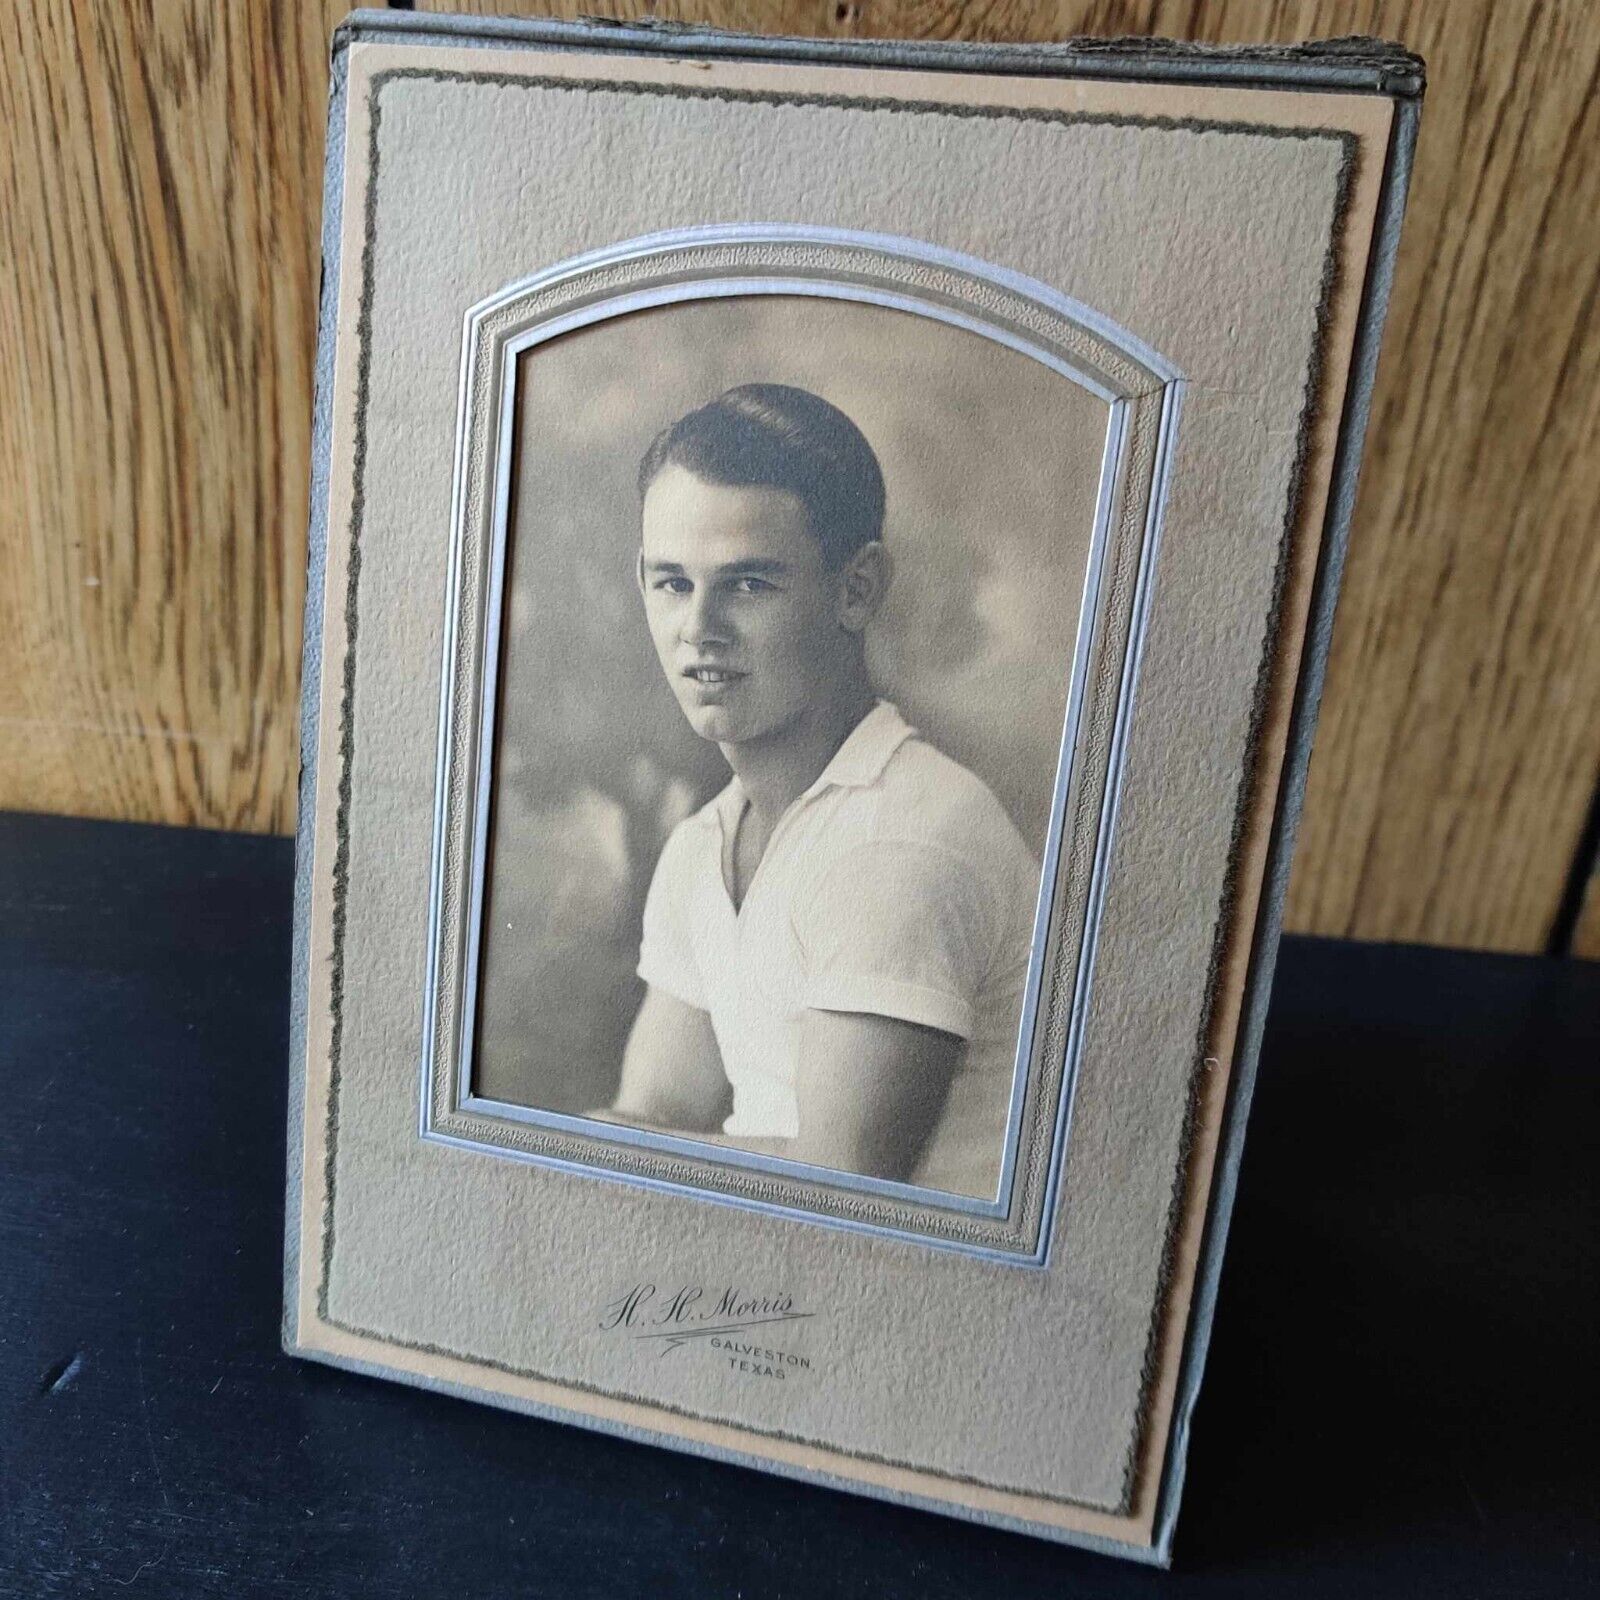 Vintage Young Gentleman in Folding Frame - 1940s or 1930s - GREAT COND